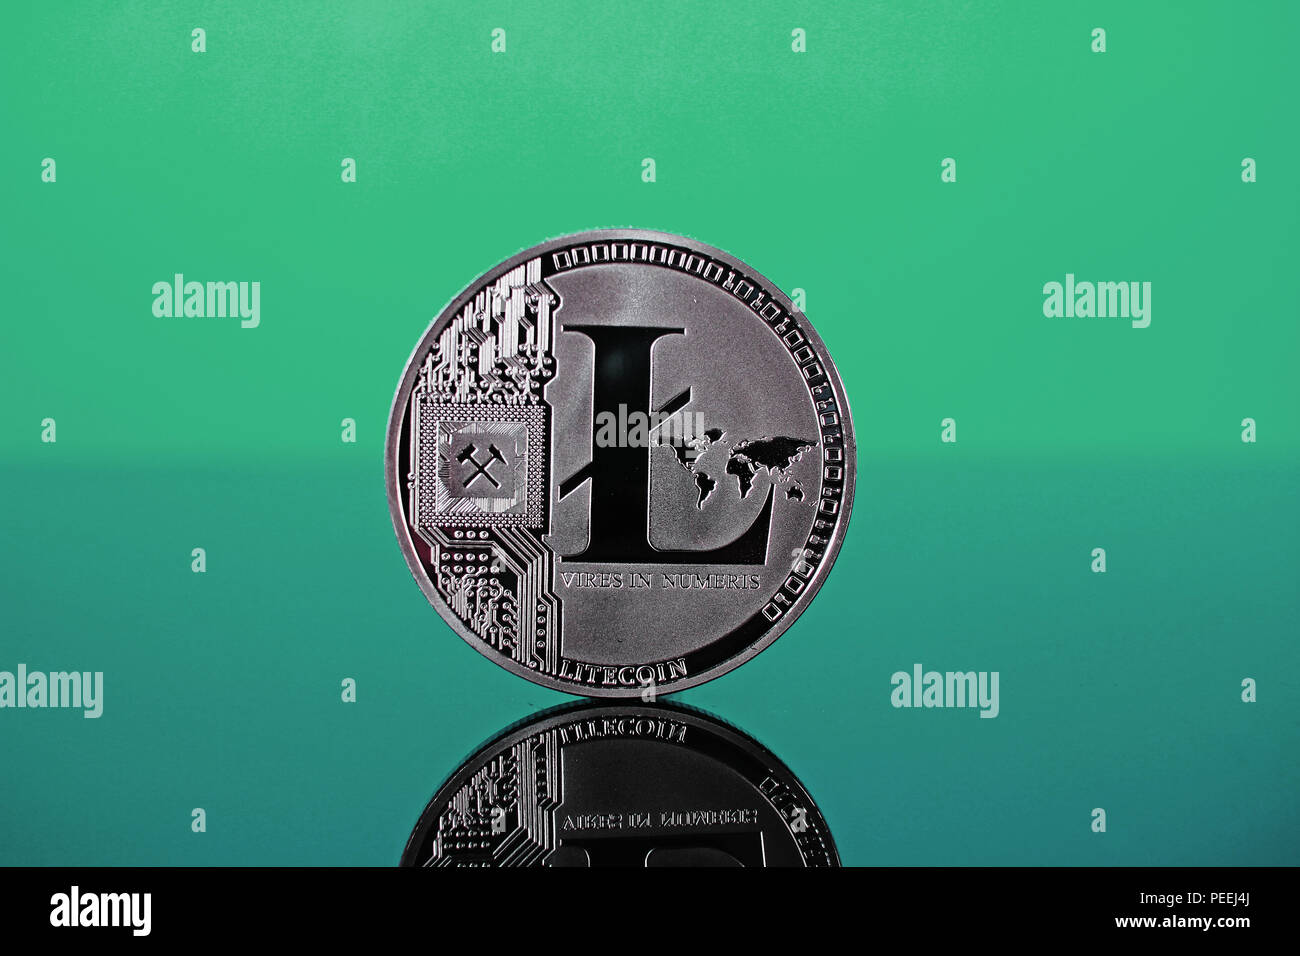 Litecoin crypto currency coin on reflective colorful background Stock Photo